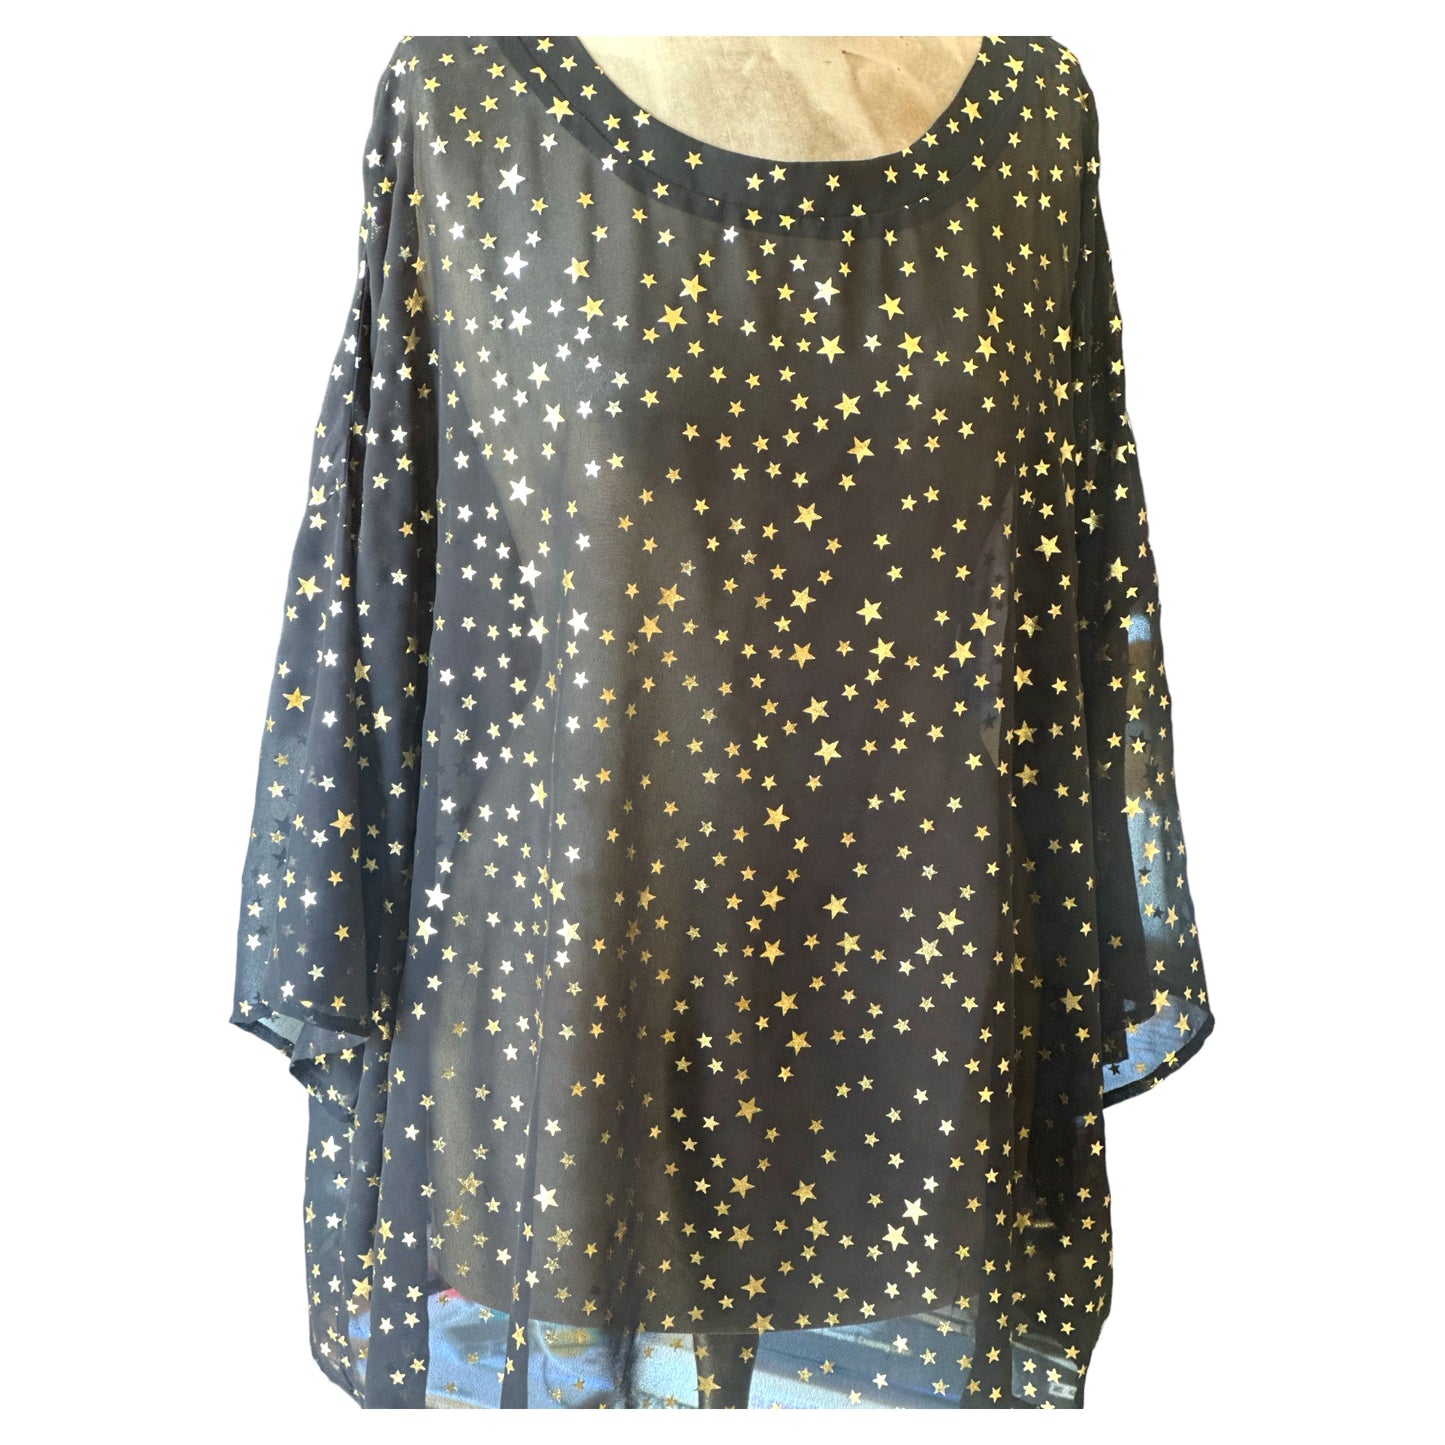 Sparkly Star sheer top